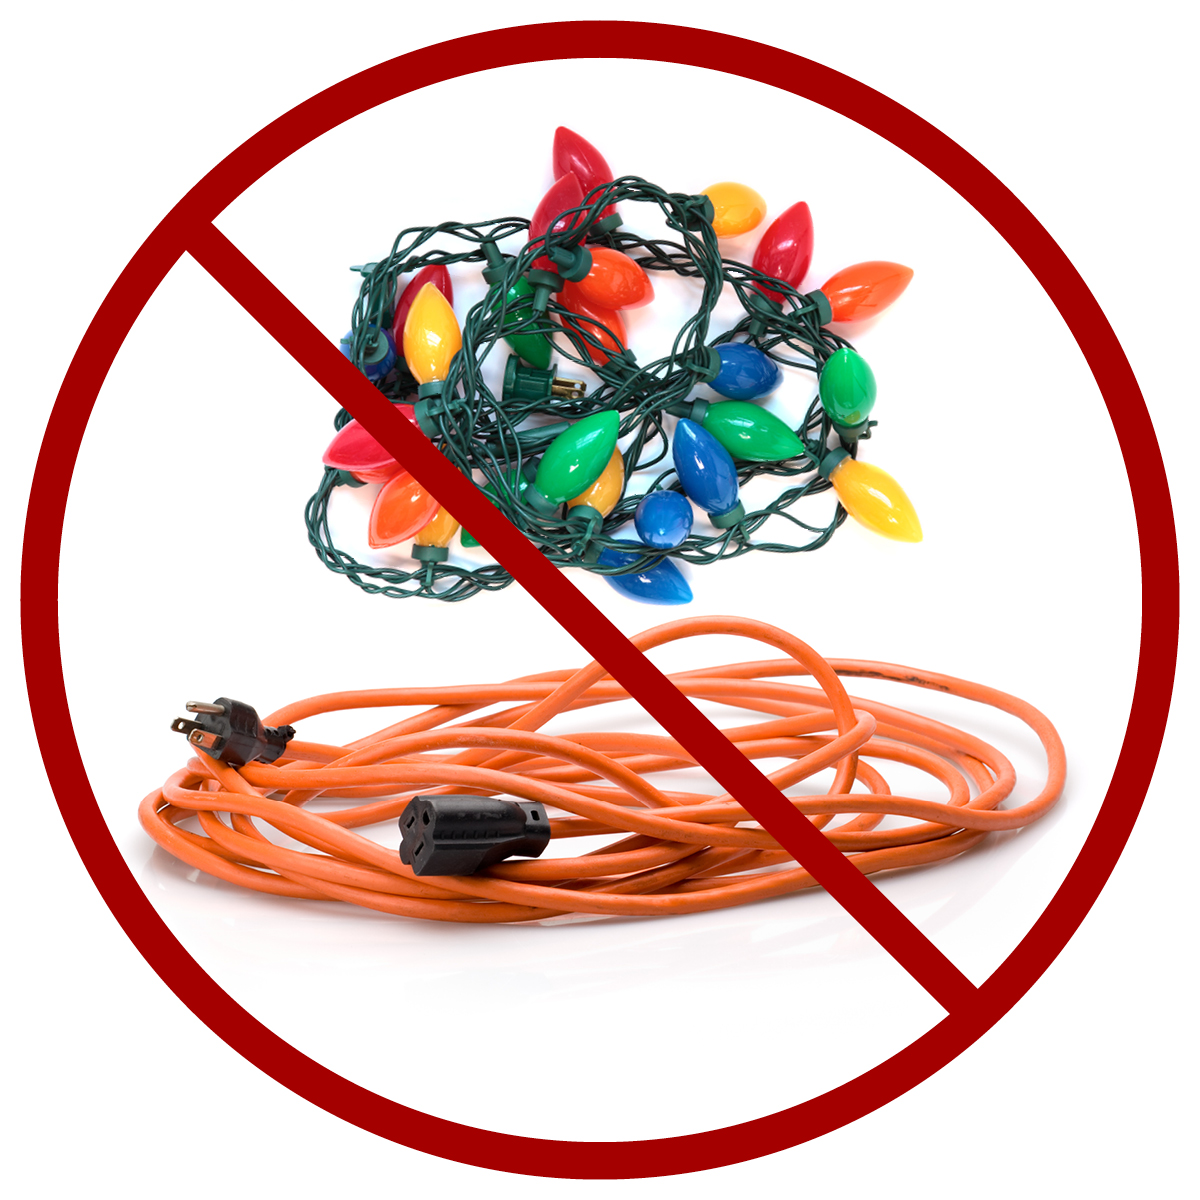 string of lights and extension cord: keep out of clue recycling cart